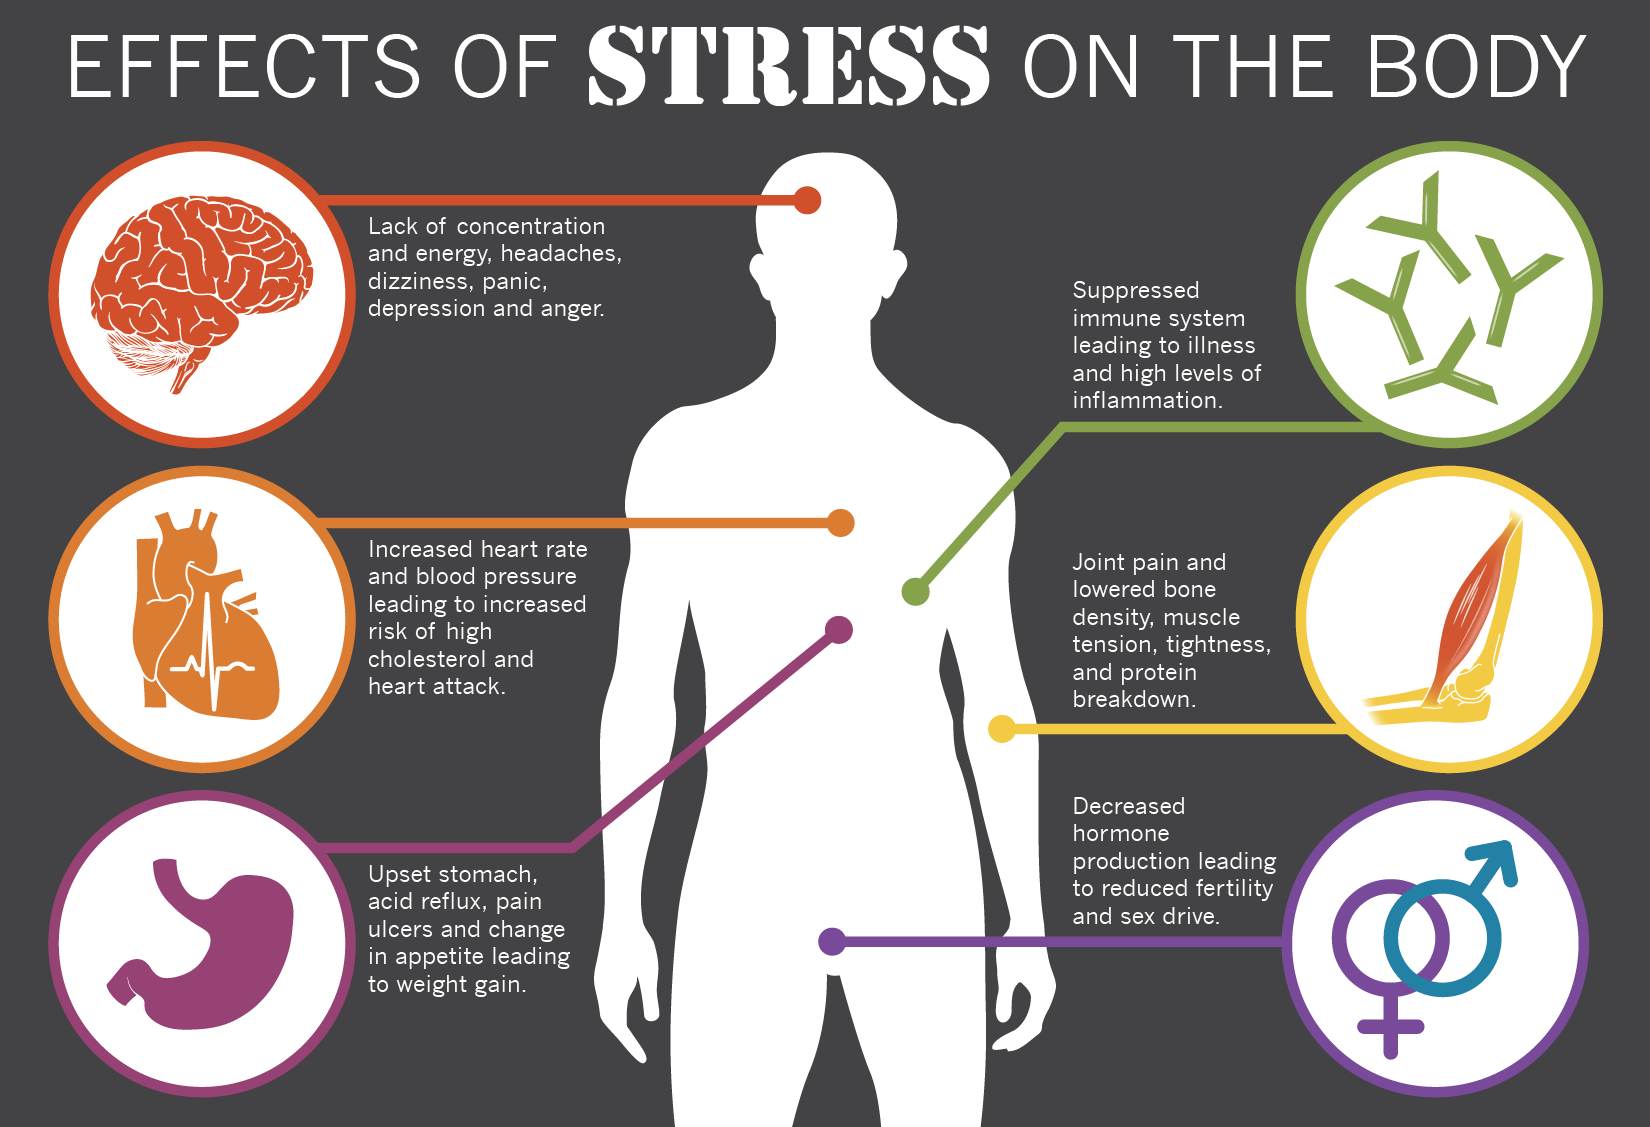 We can body. Effects of stress. How stress affects our bodies. Stress Effect on body. The Symptoms of stress картинки.